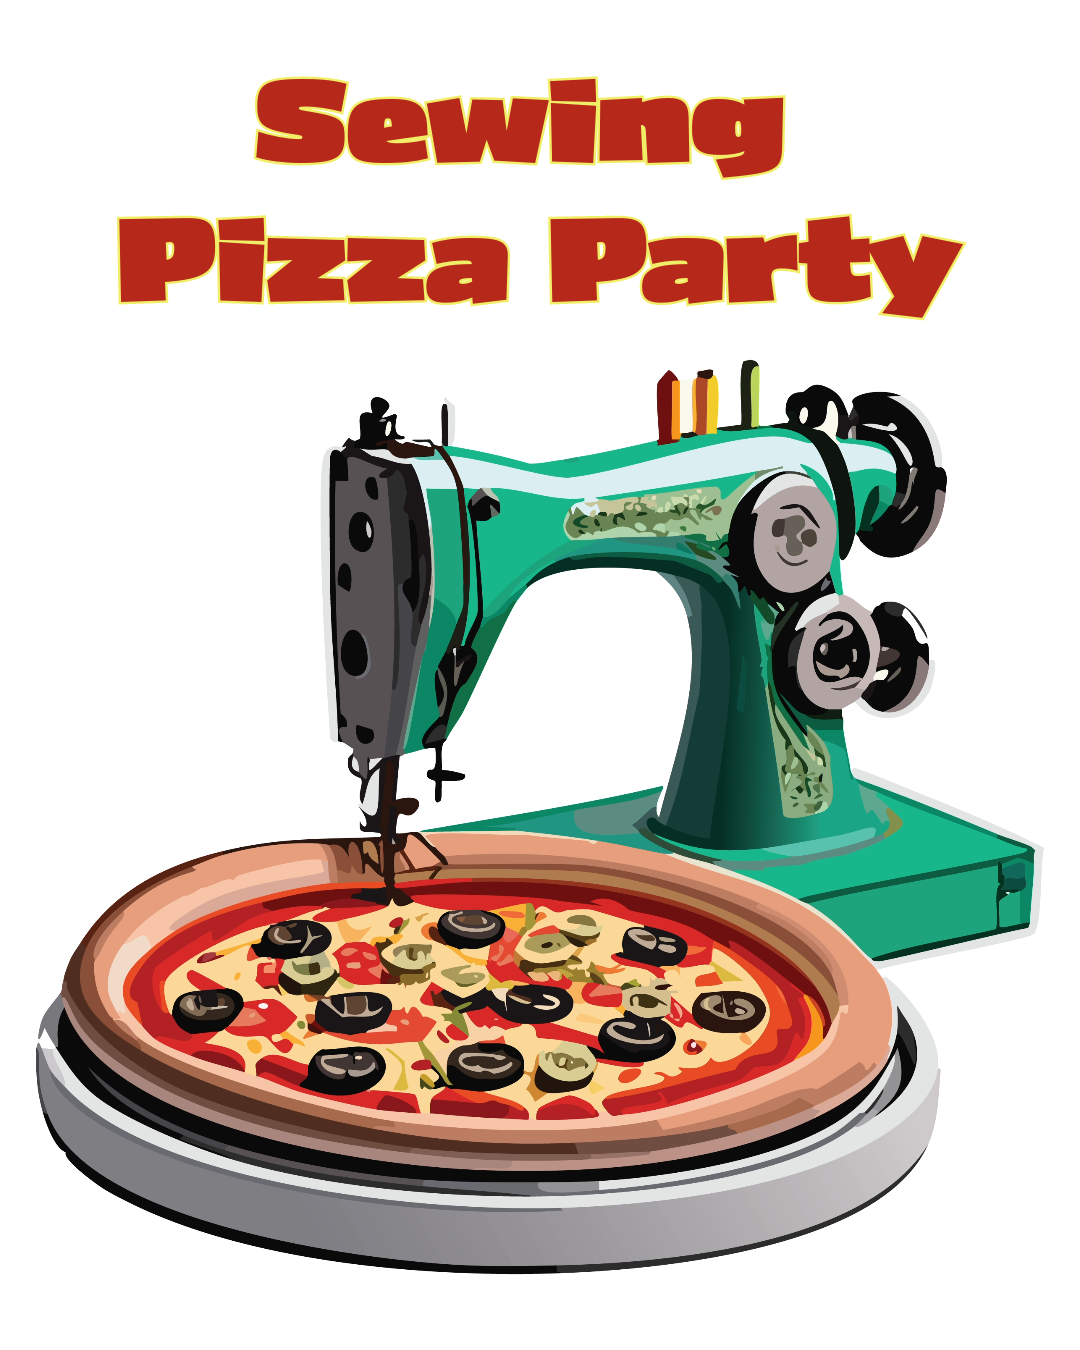 Sewing Pizza Party - Friday Feb 23rd